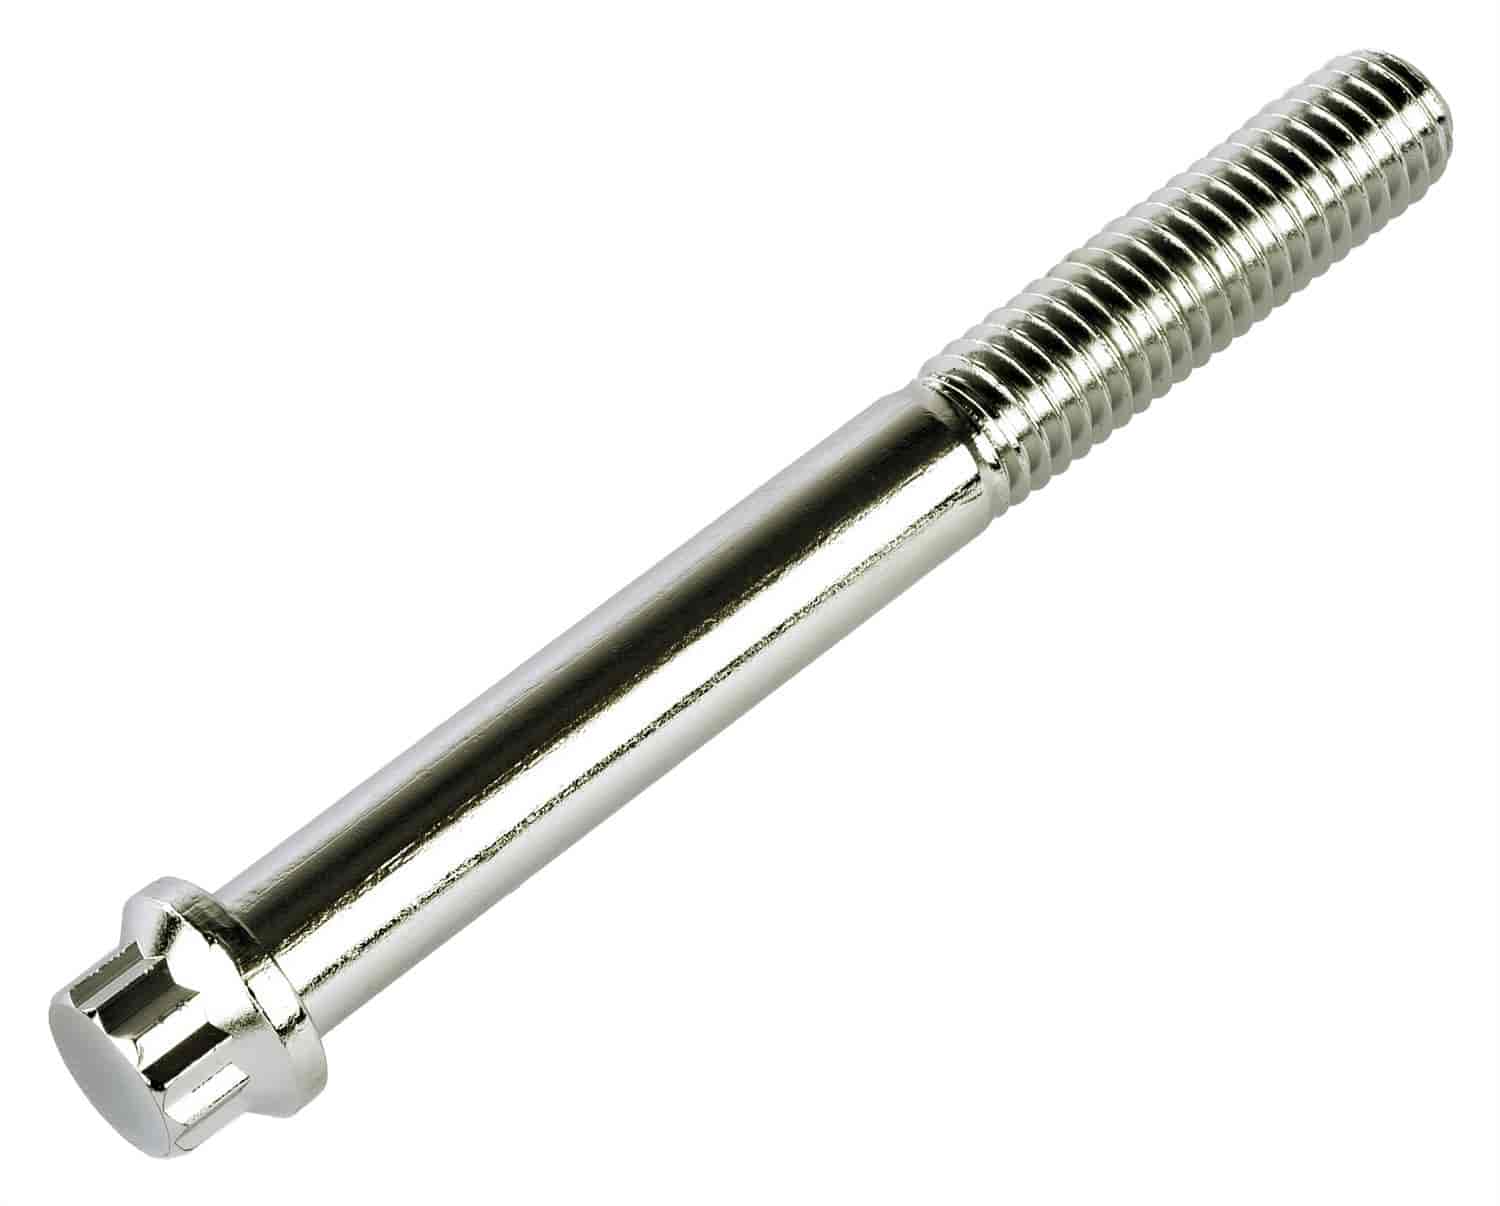 12-Point Fastener [3/8 in. -16 Thread x 3 1/2 (.500) in. Length]